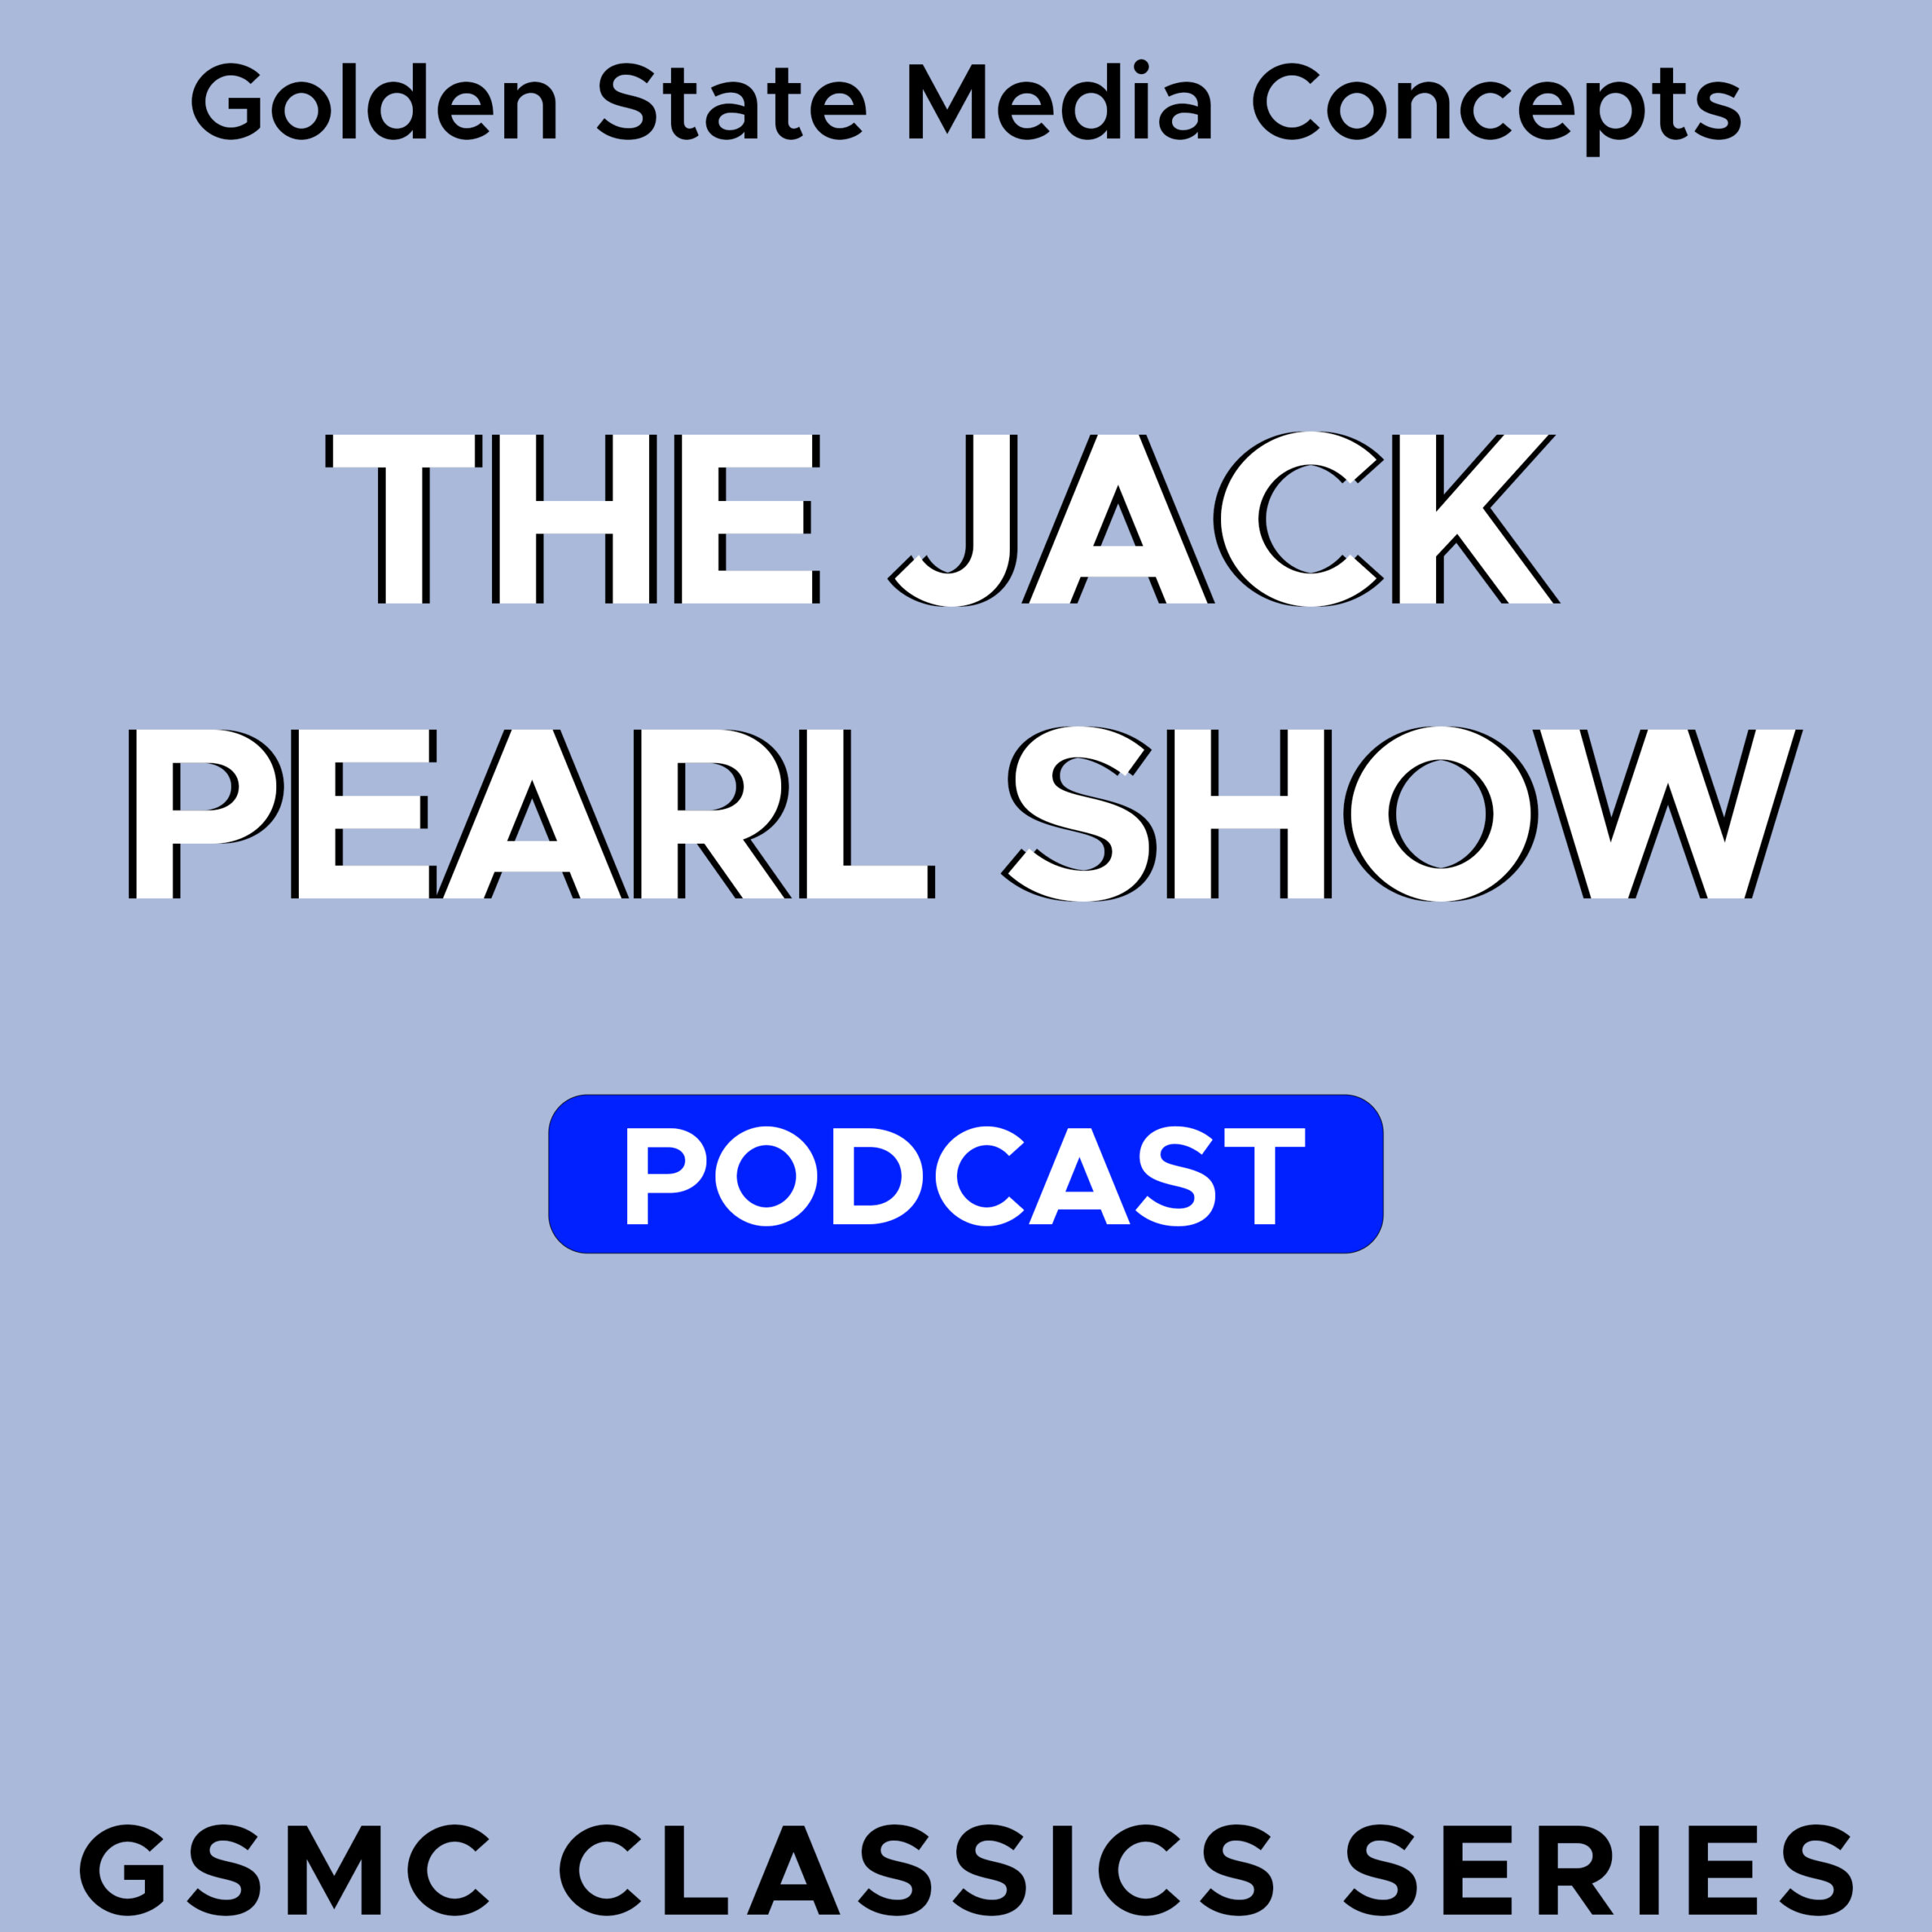 The Jack Pearl Show